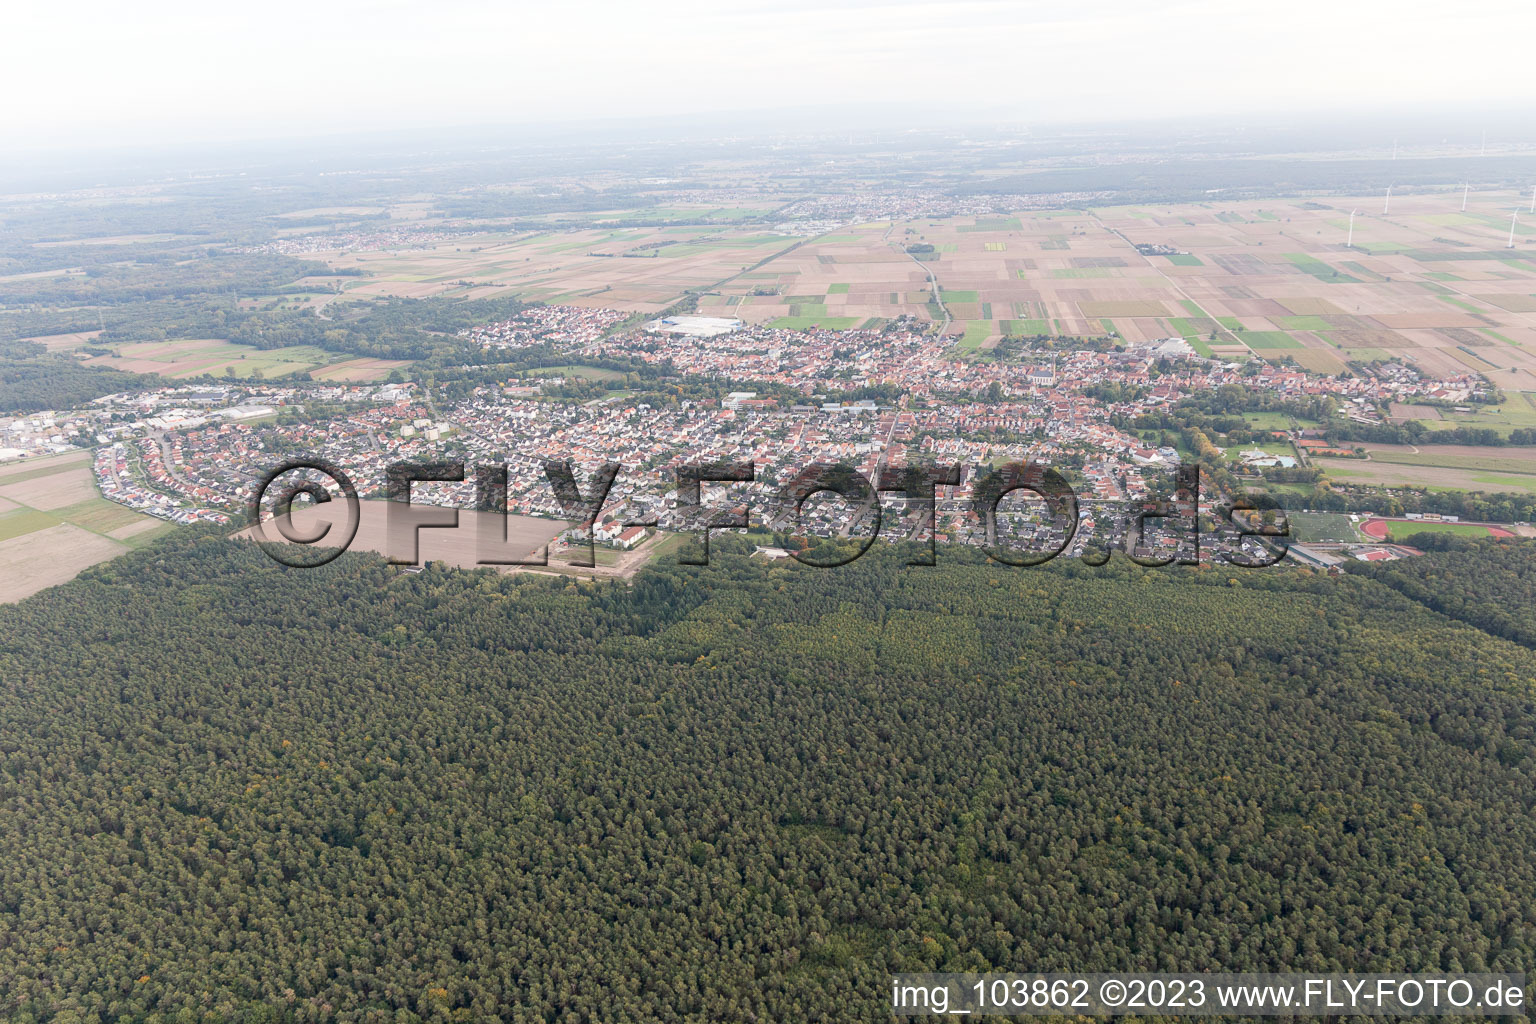 Bellheim in the state Rhineland-Palatinate, Germany seen from a drone